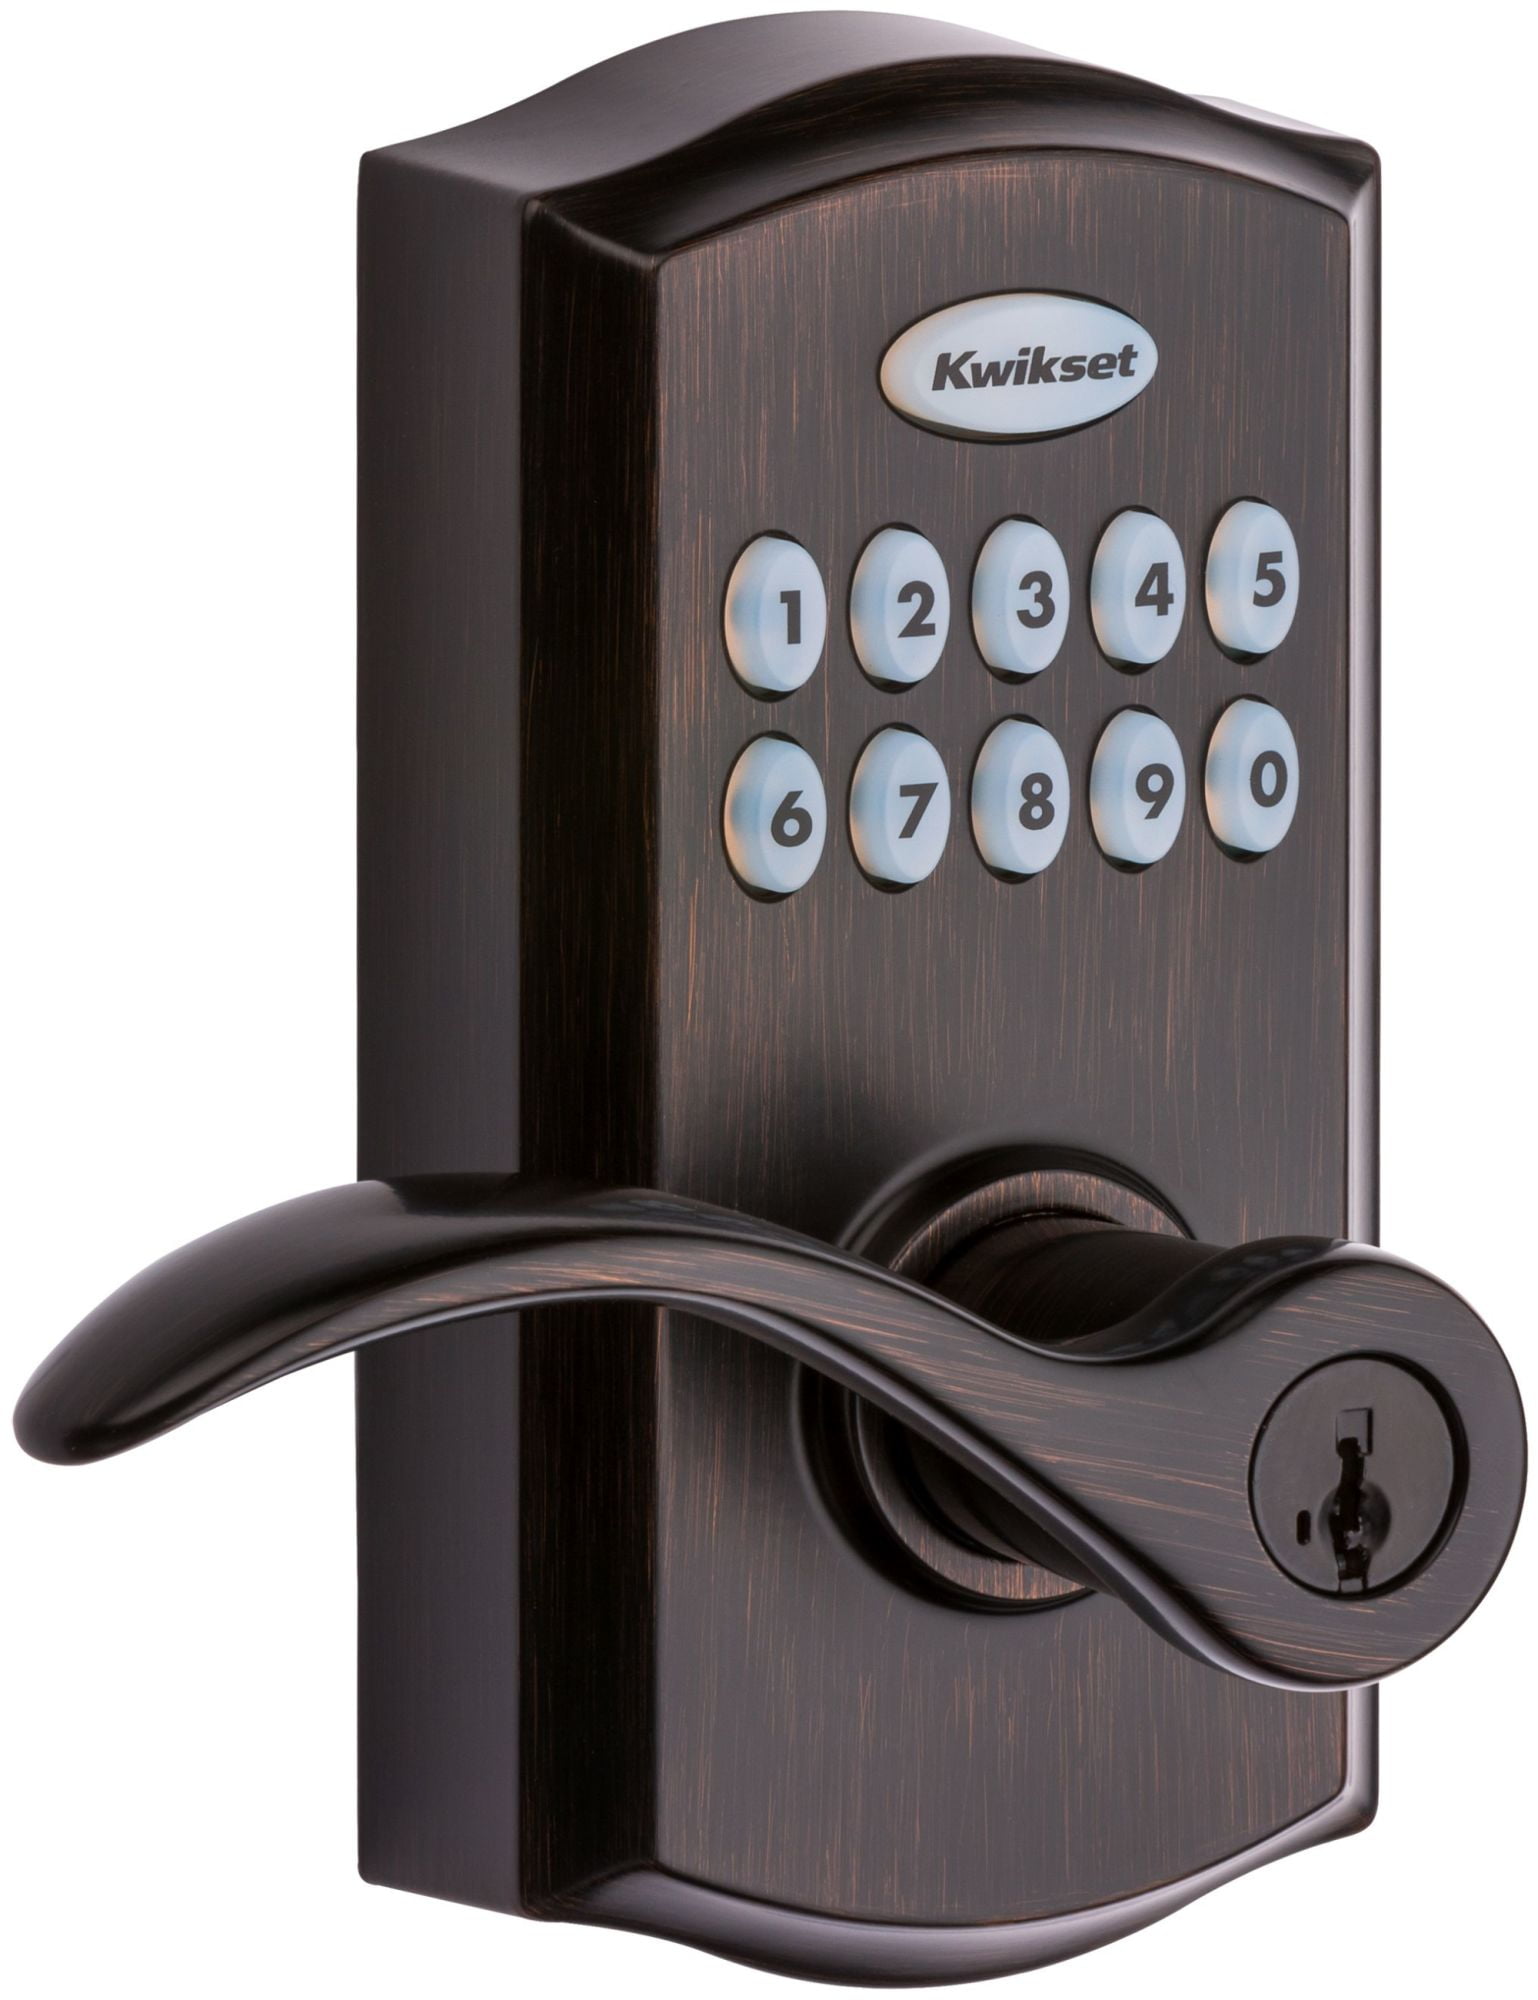 Kwikset SmartCode 955 Satin Chrome Metal Electronic Touch Pad